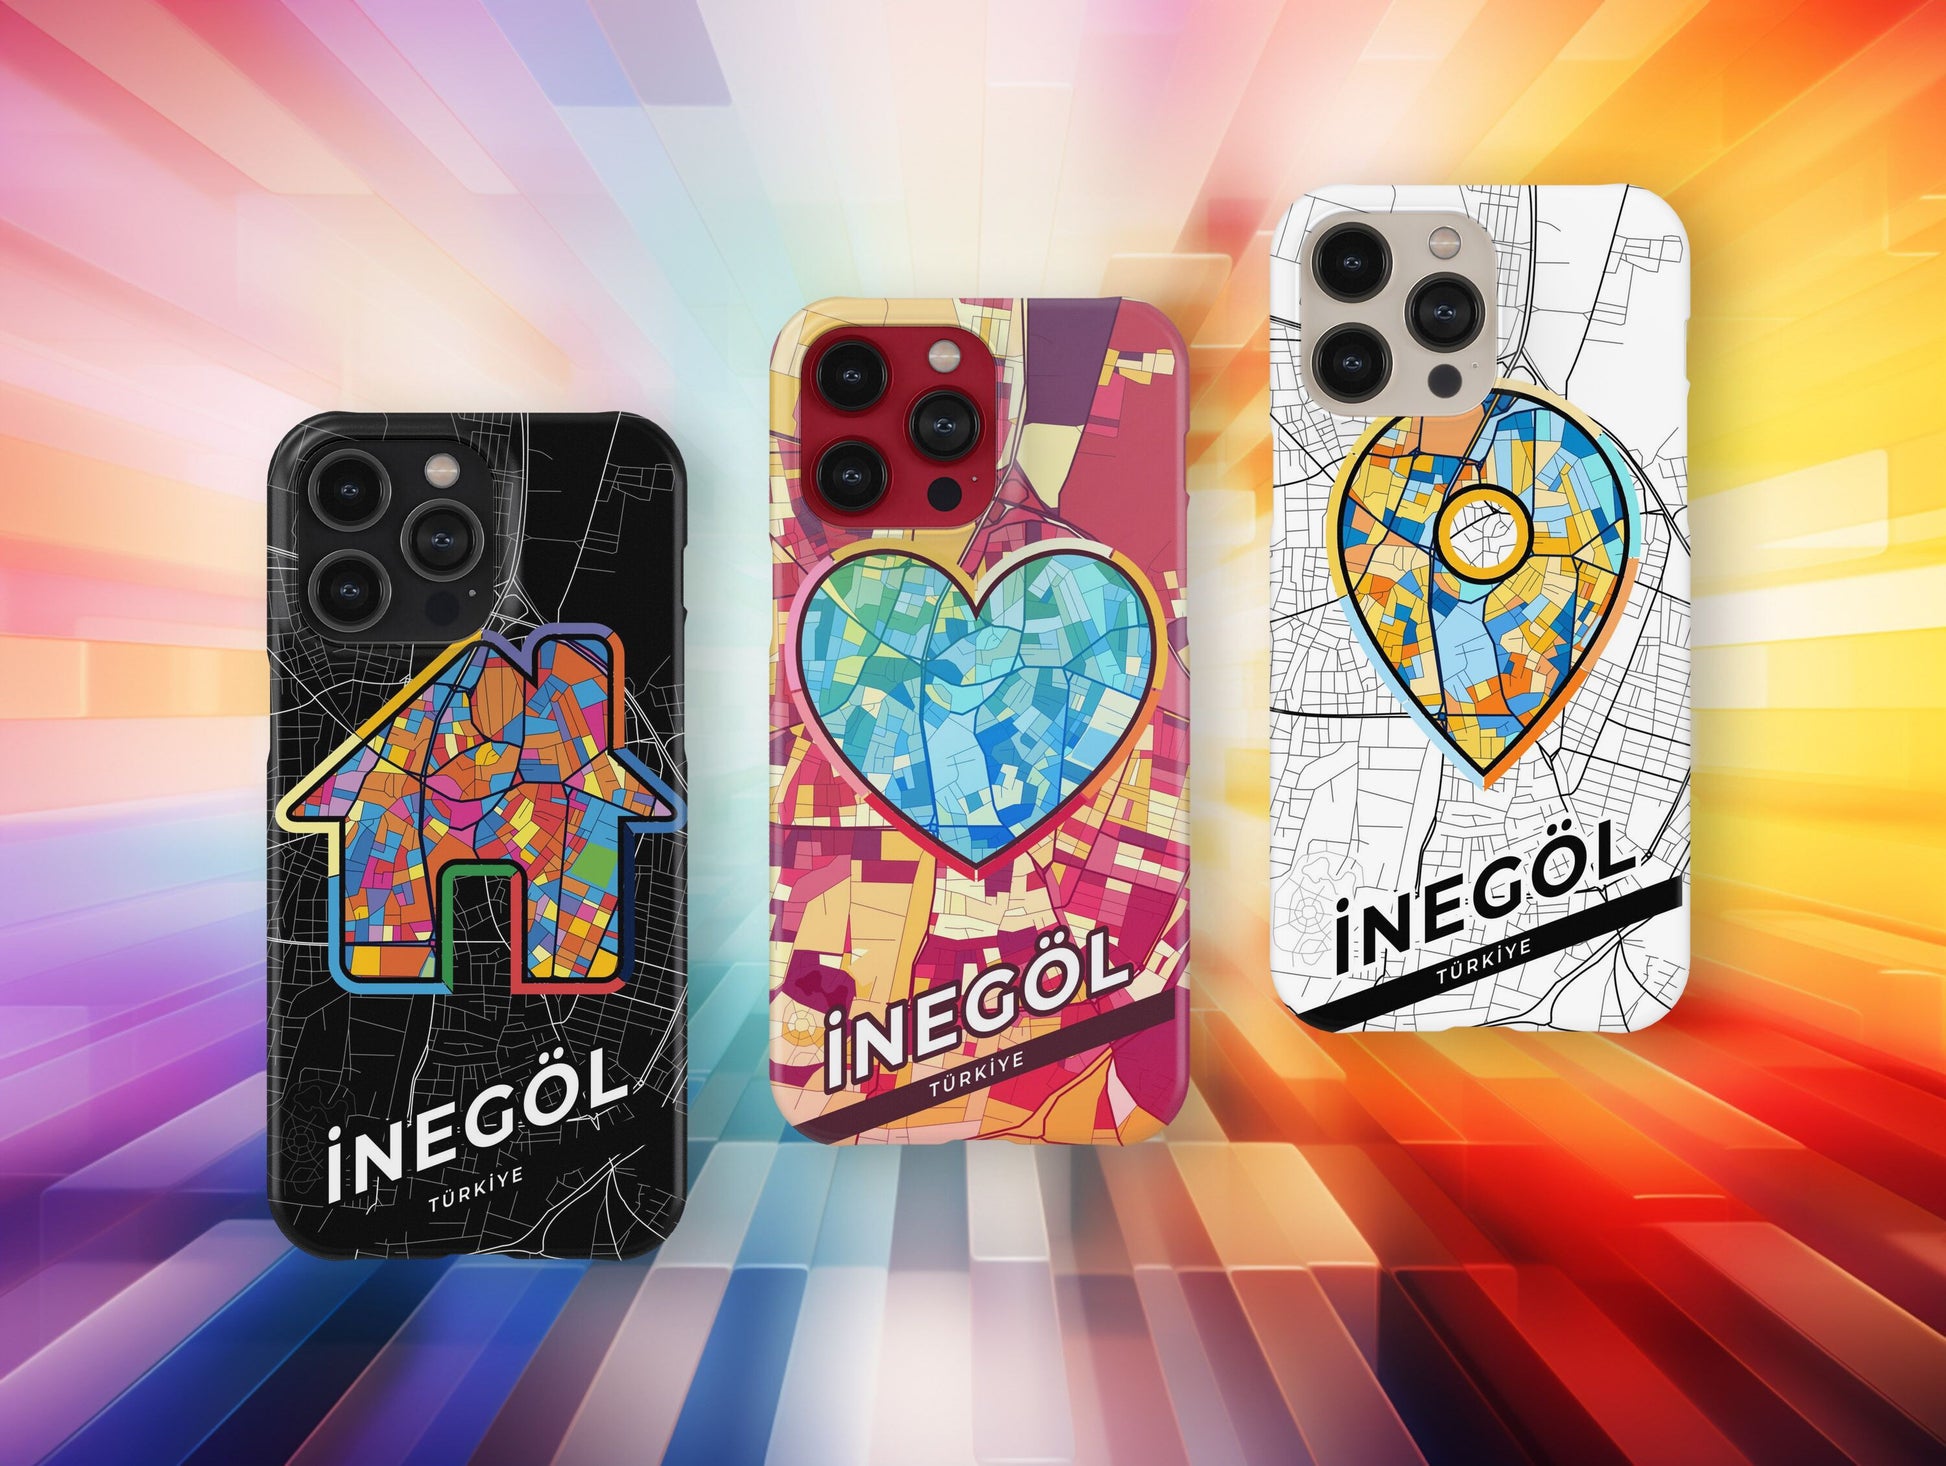 İnegöl Turkey slim phone case with colorful icon. Birthday, wedding or housewarming gift. Couple match cases.